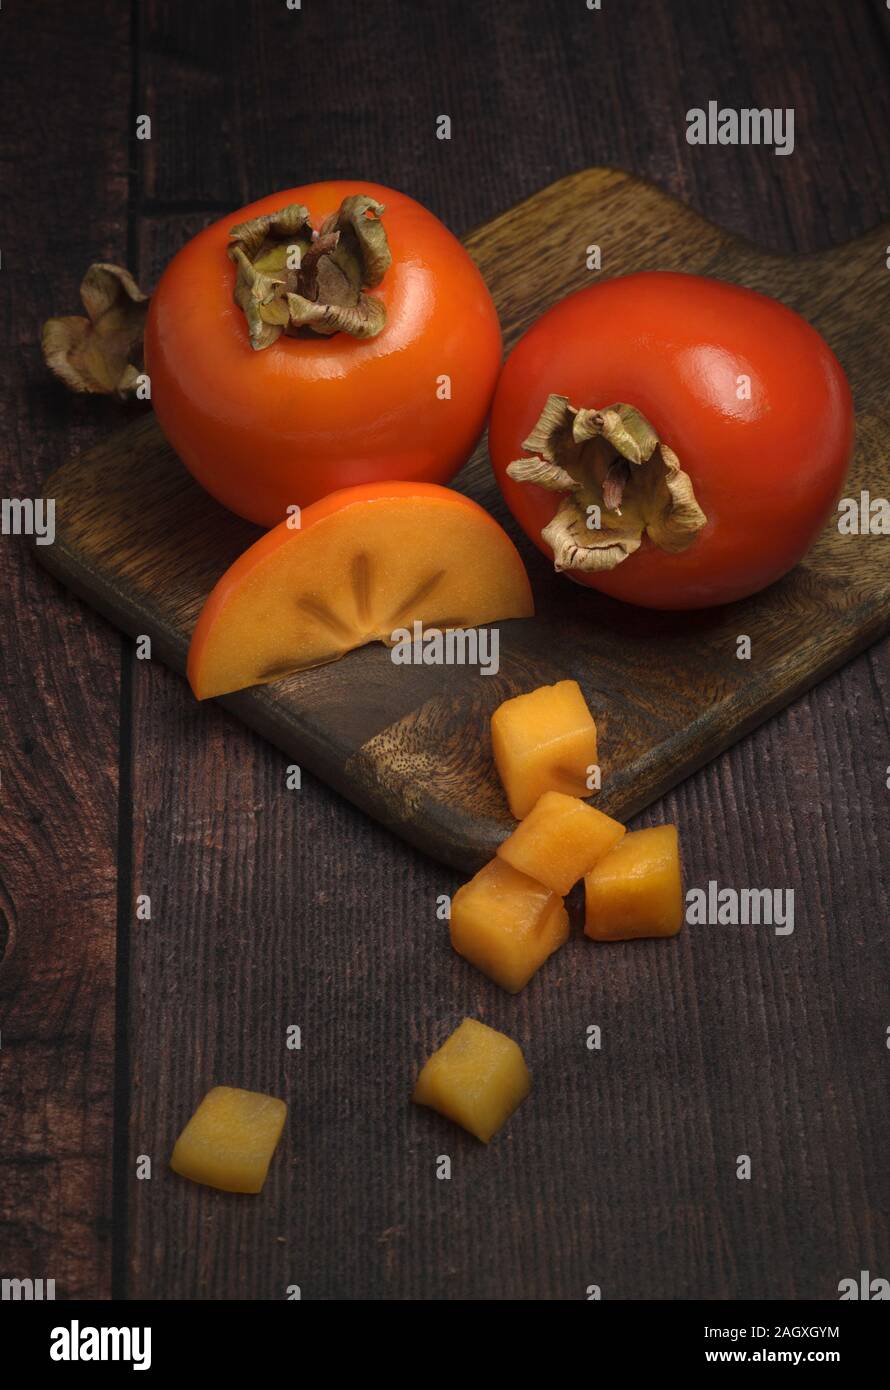 Fresh ripe persimmons on wooden cutting board Stock Photo